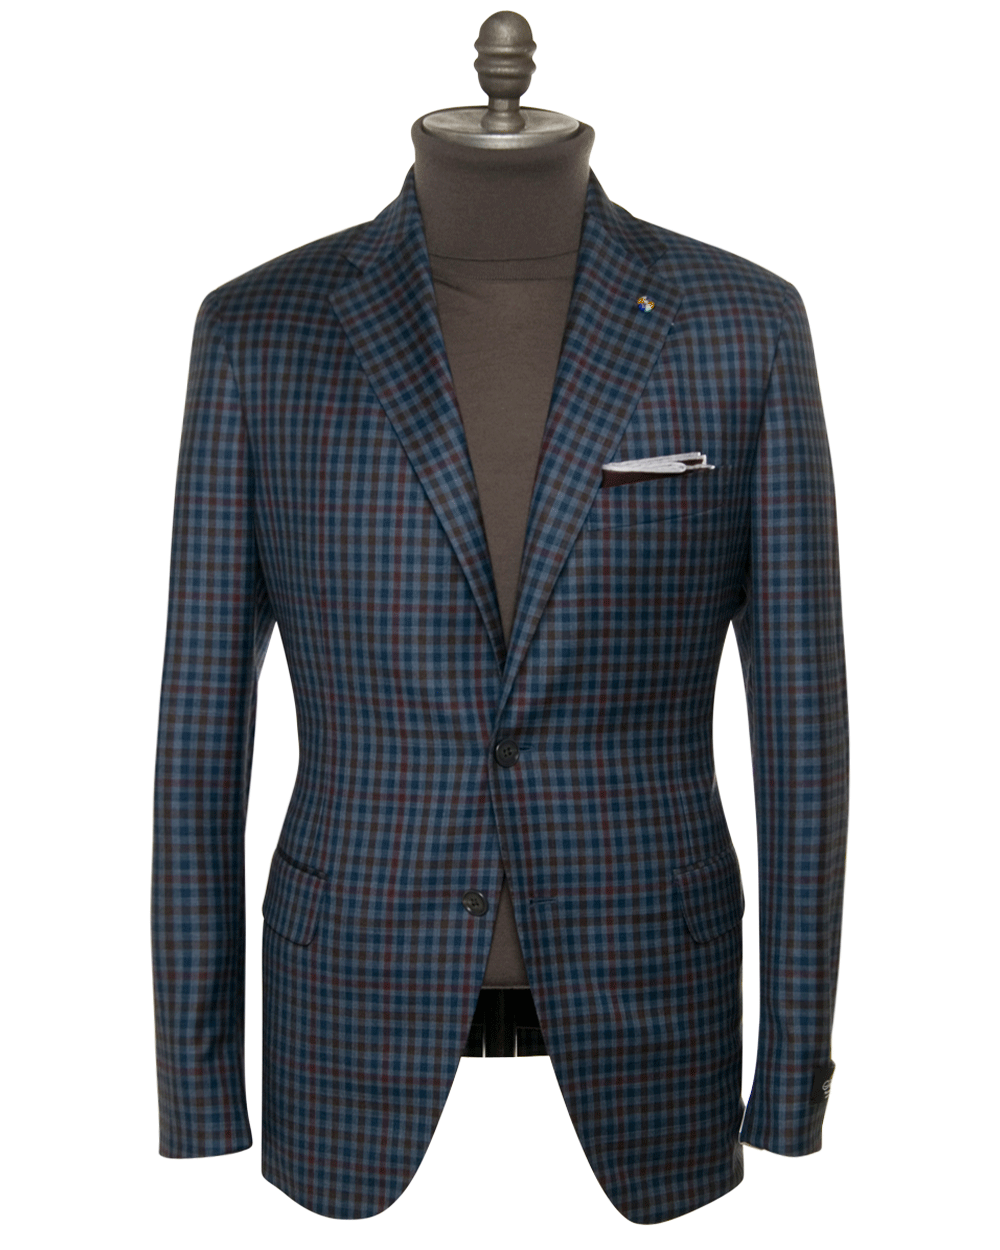 Blue and Red Plaid Windowpane Wool Sportcoat